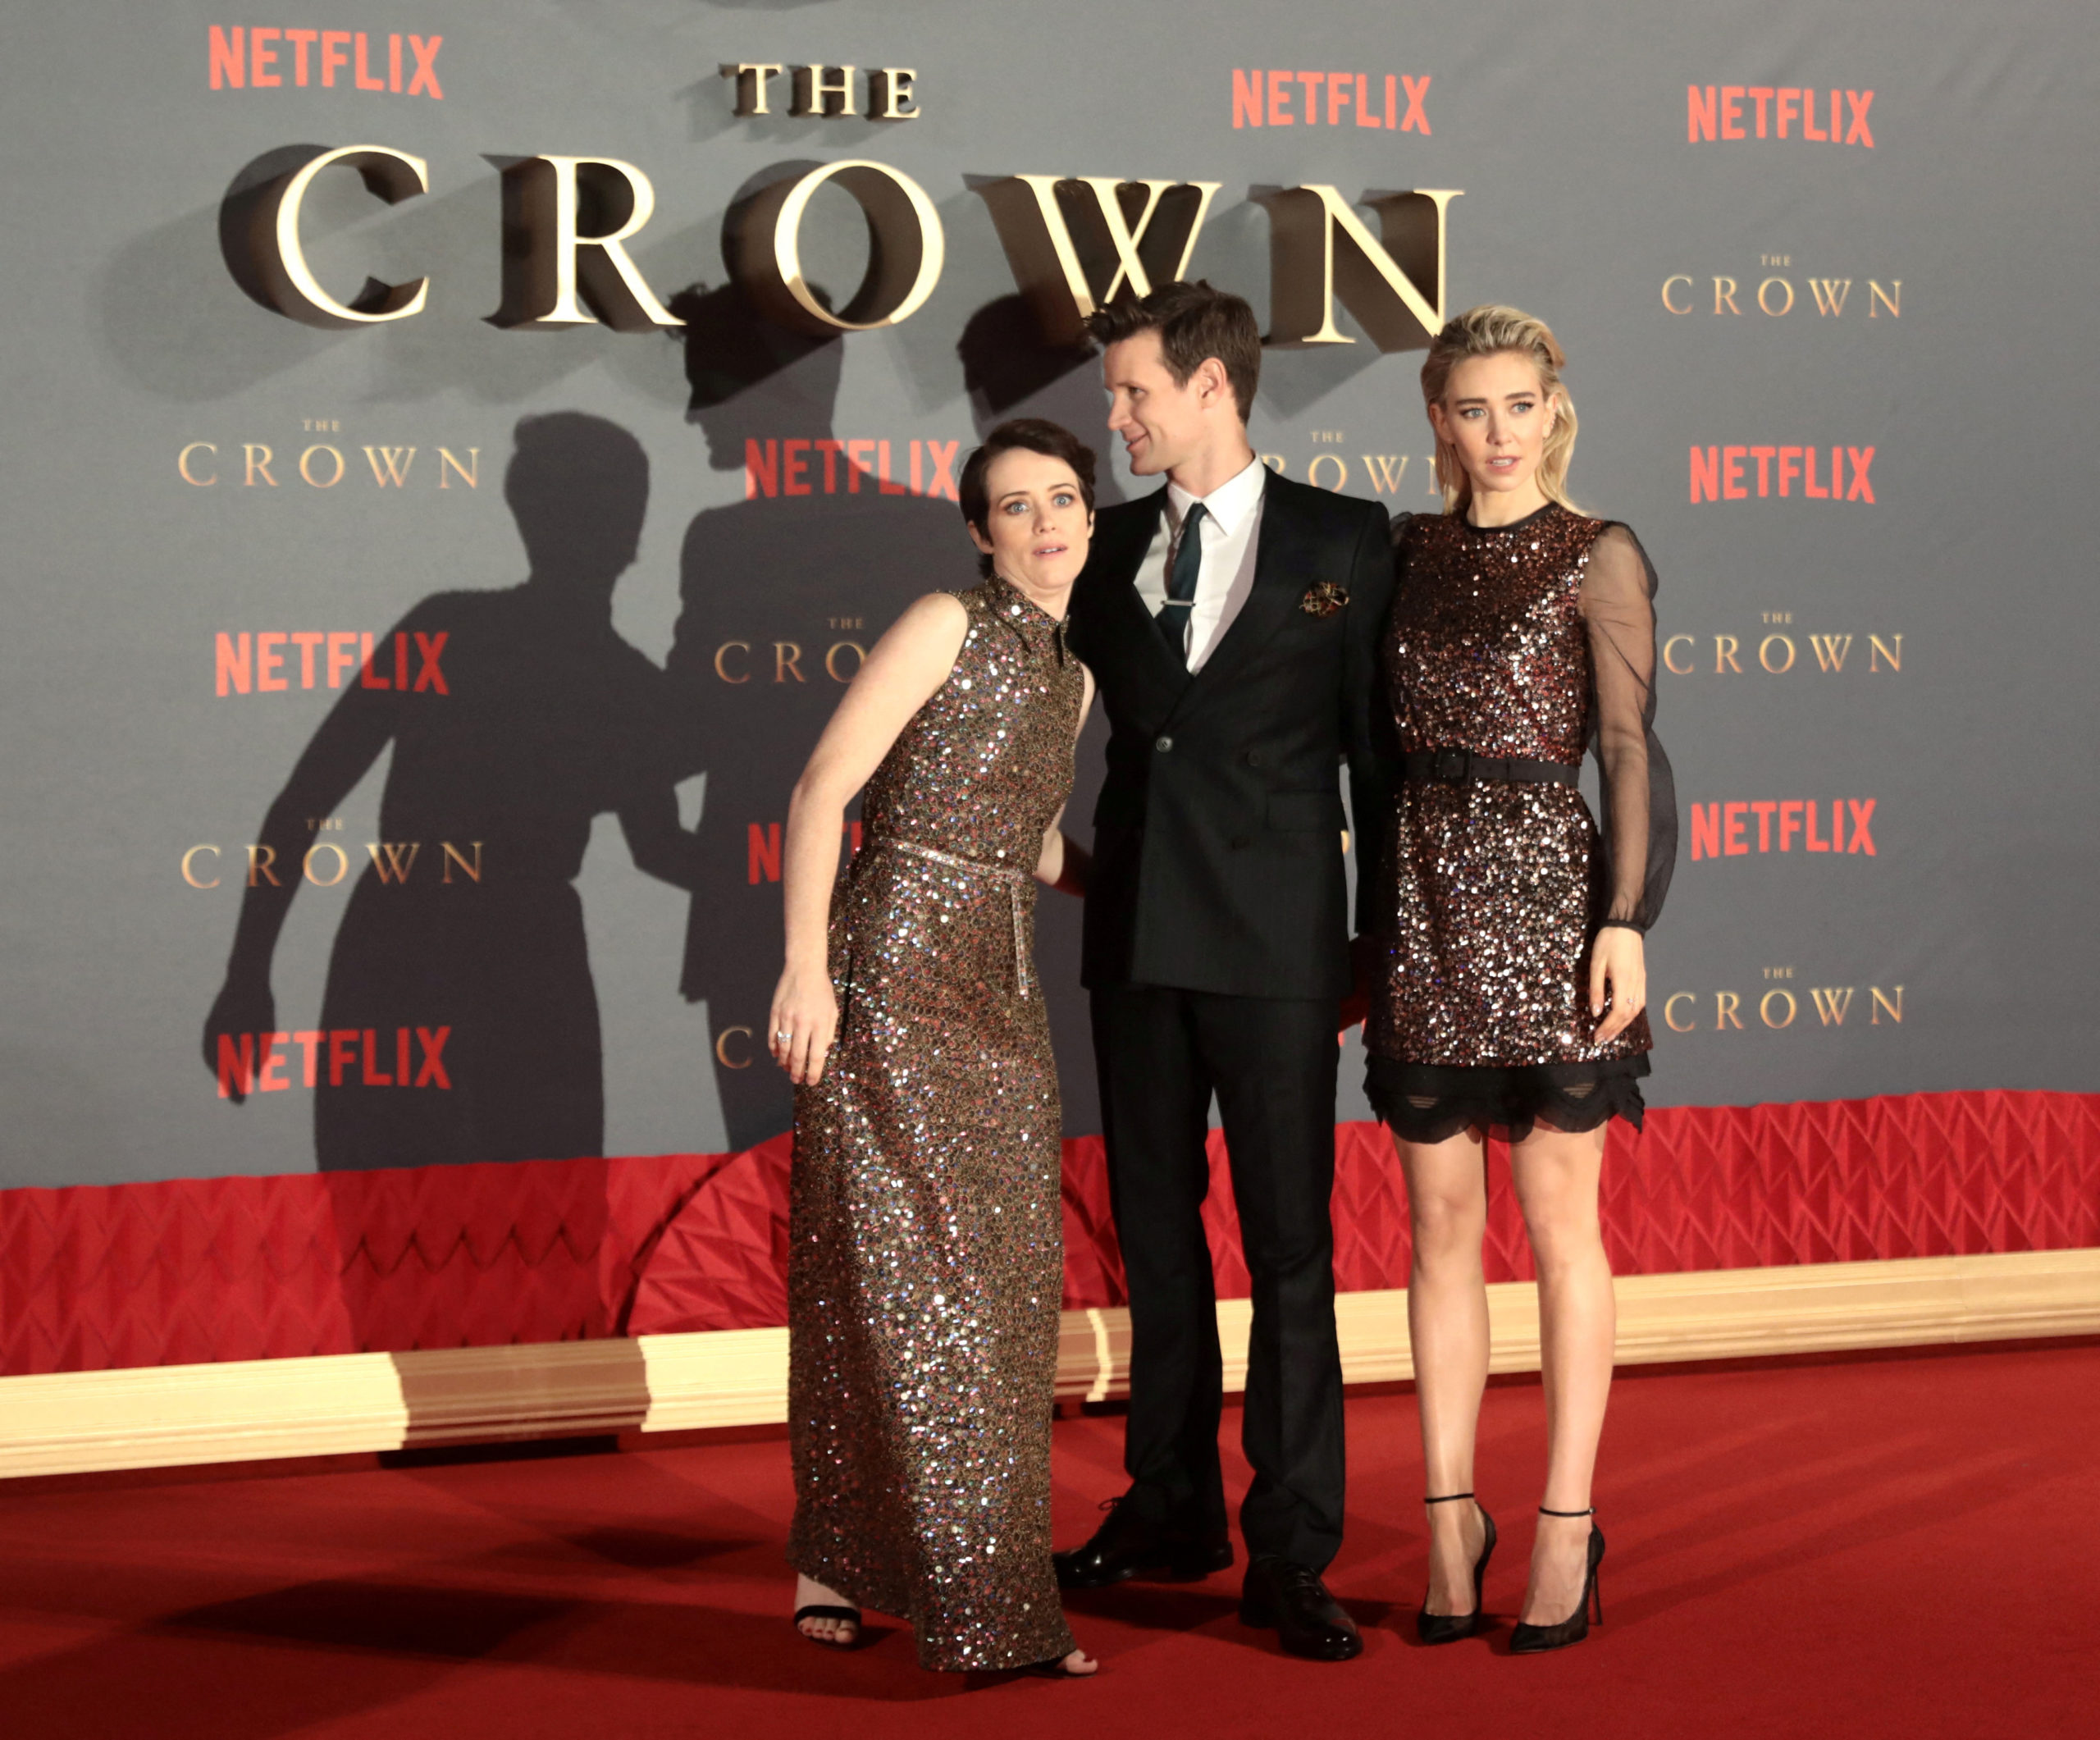 Actors Claire Foy, who plays Queen Elizabeth II, Matt Smith who plays Philip Duke of Edinburgh and Vanessa Kirby who plays Princess Margaret, attend the premiere of "The Crown" Season 2 in London, Britain, November 21, 2017. REUTERS/Simon Dawson